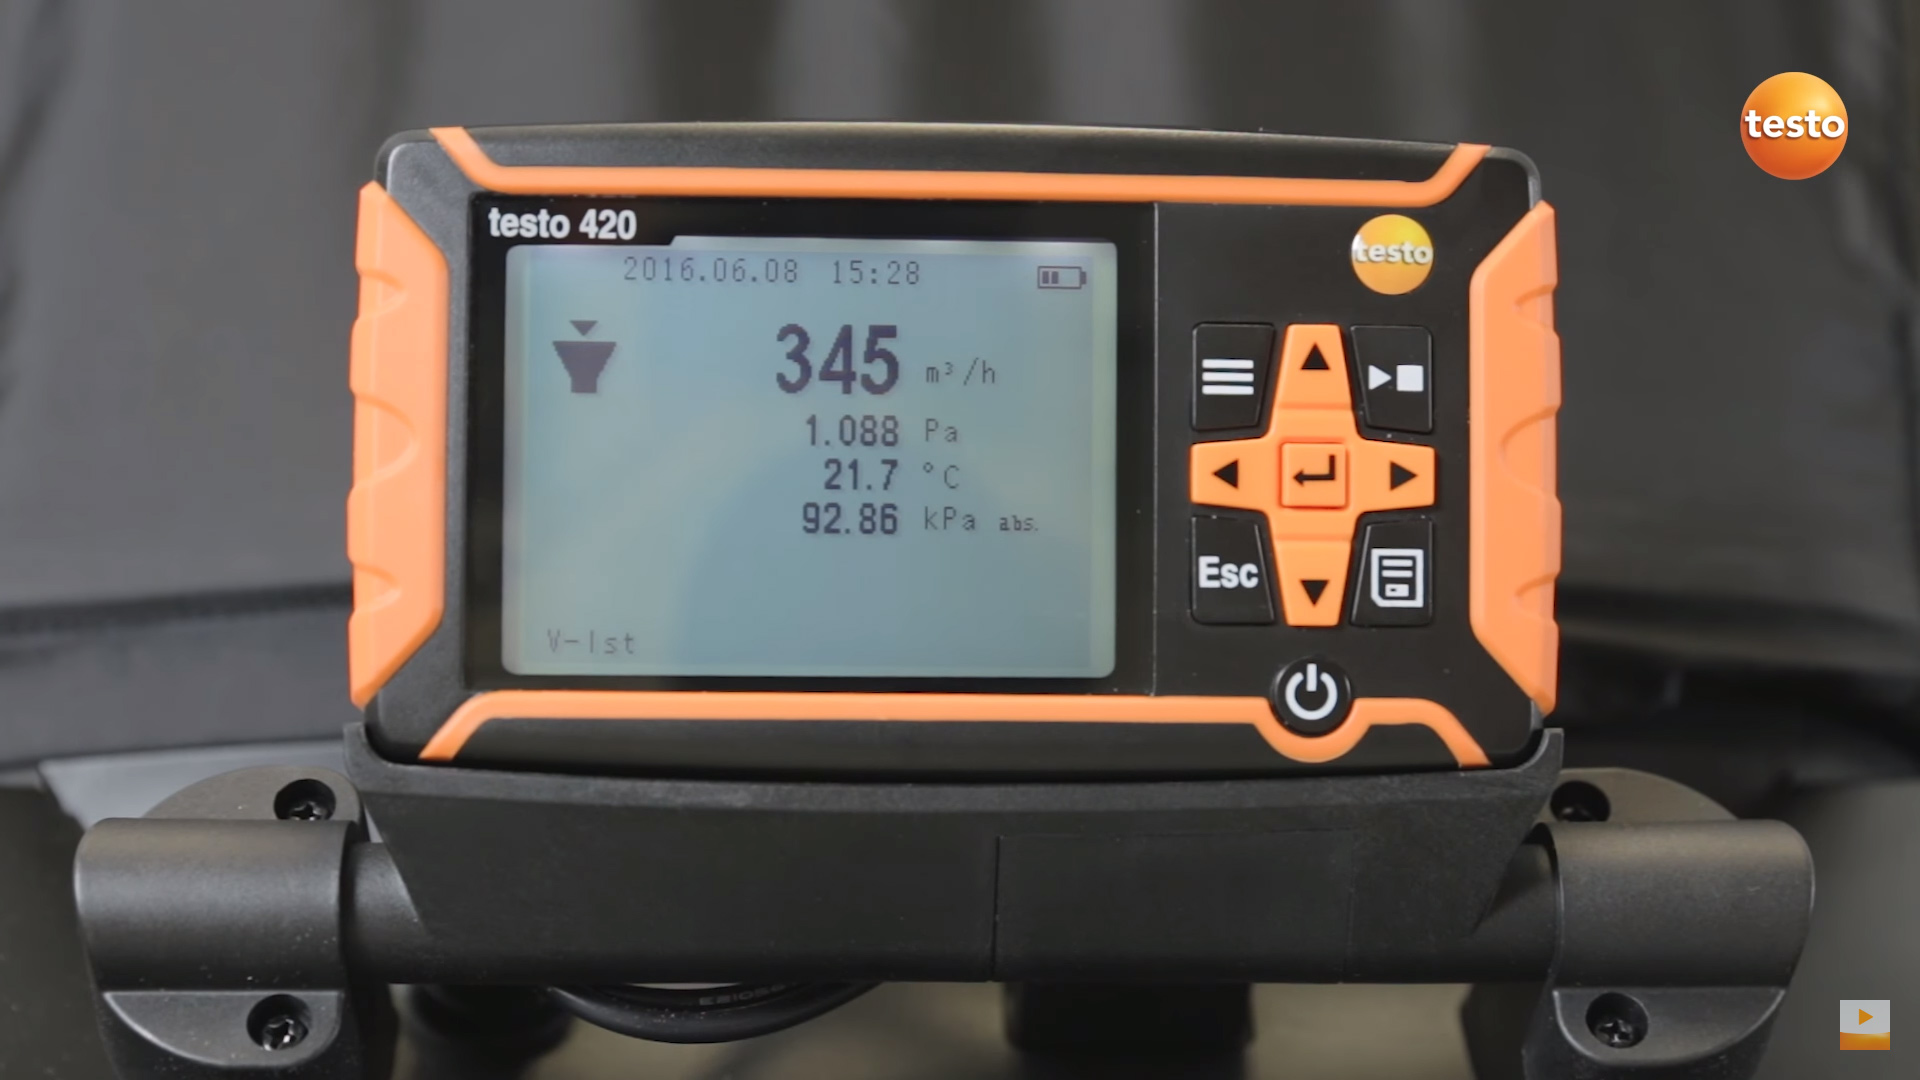 A close up of the Testo 420 Differential Pressure Measuring Instrument.